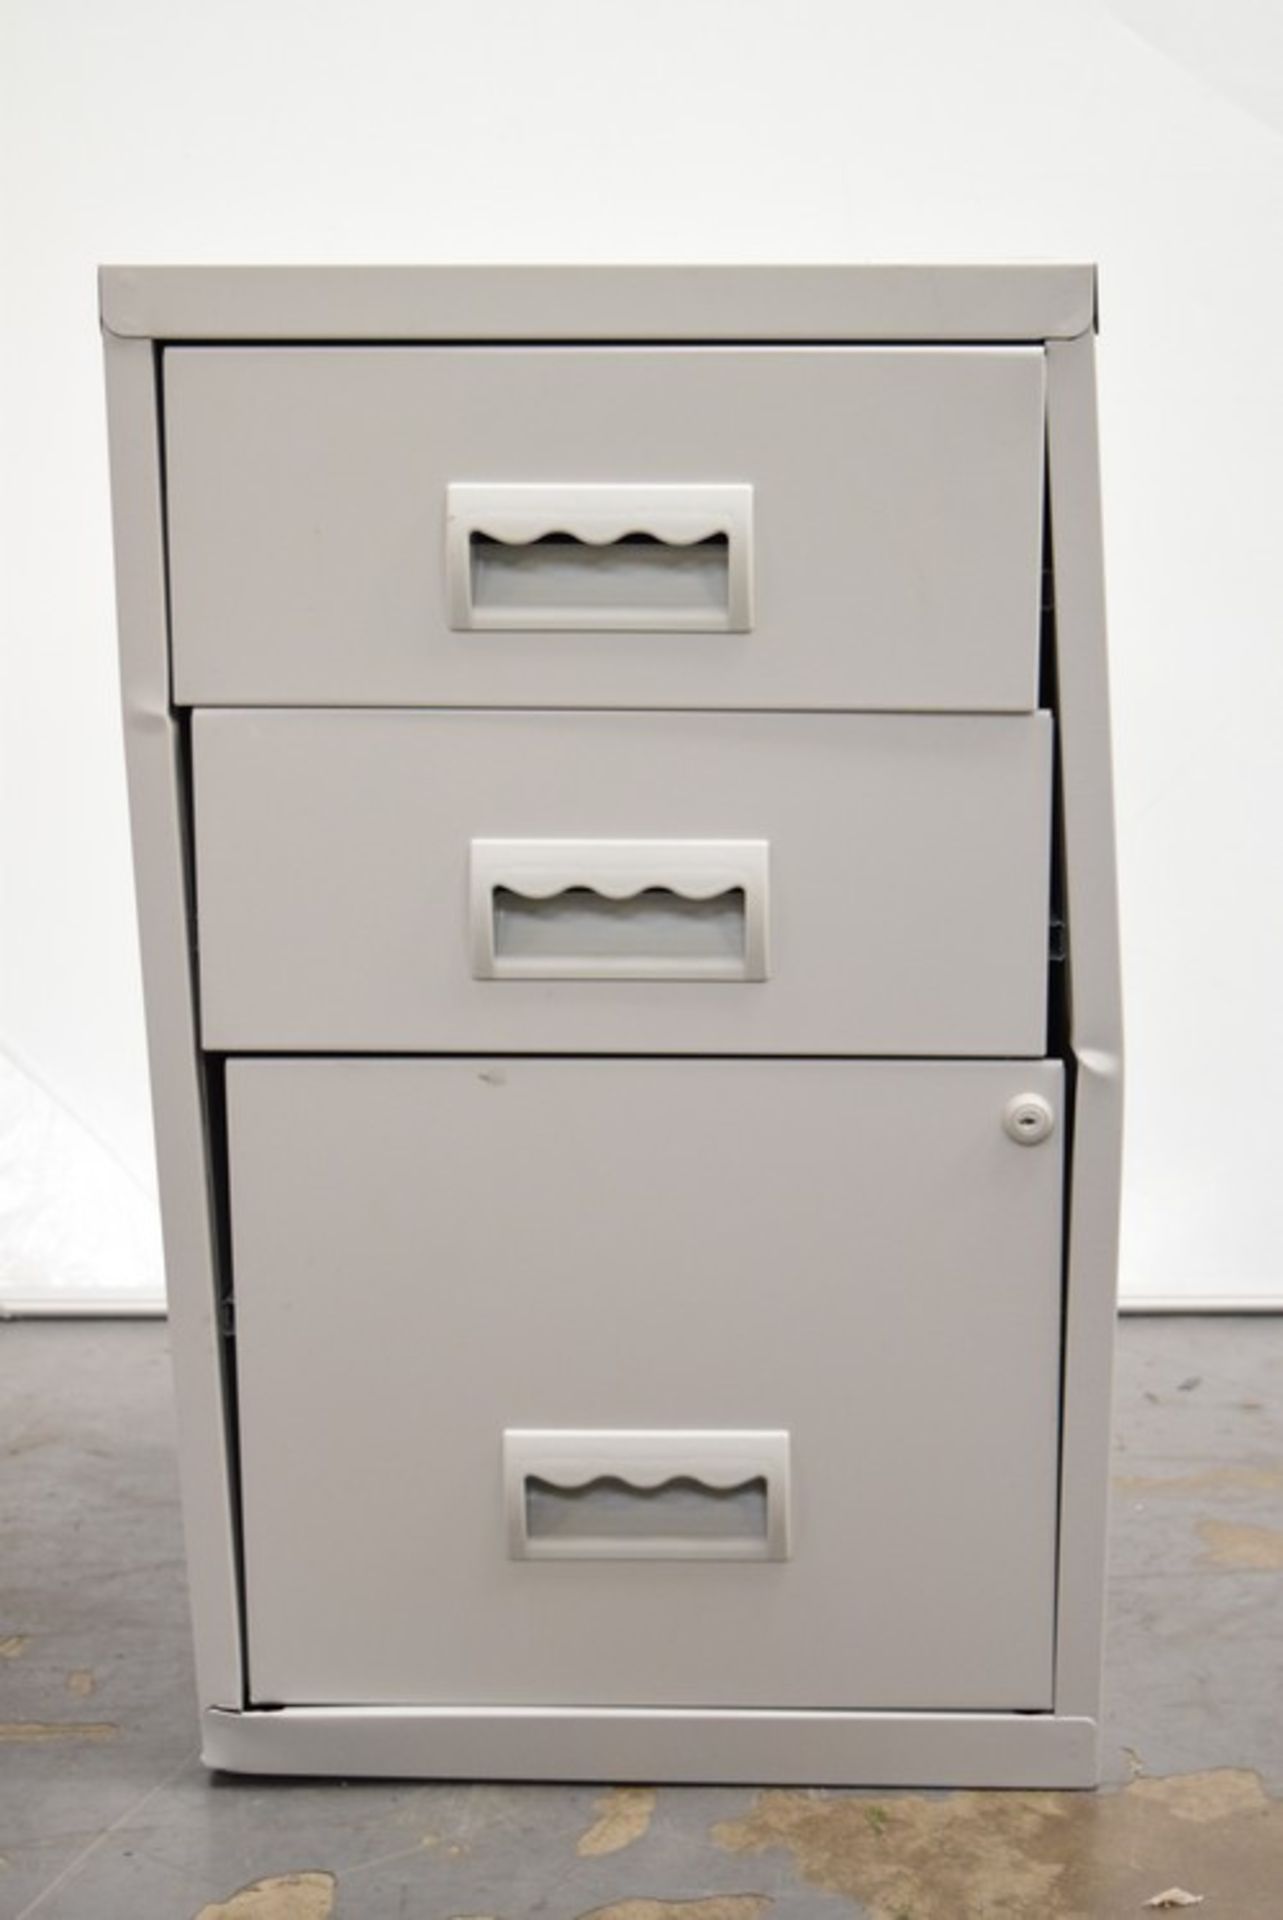 2 x A4 FILING CABINETS RRP £45 EACH *PLEASE NOTE THAT THE BID PRICE IS MULTIPLIED BY THE NUMBER OF